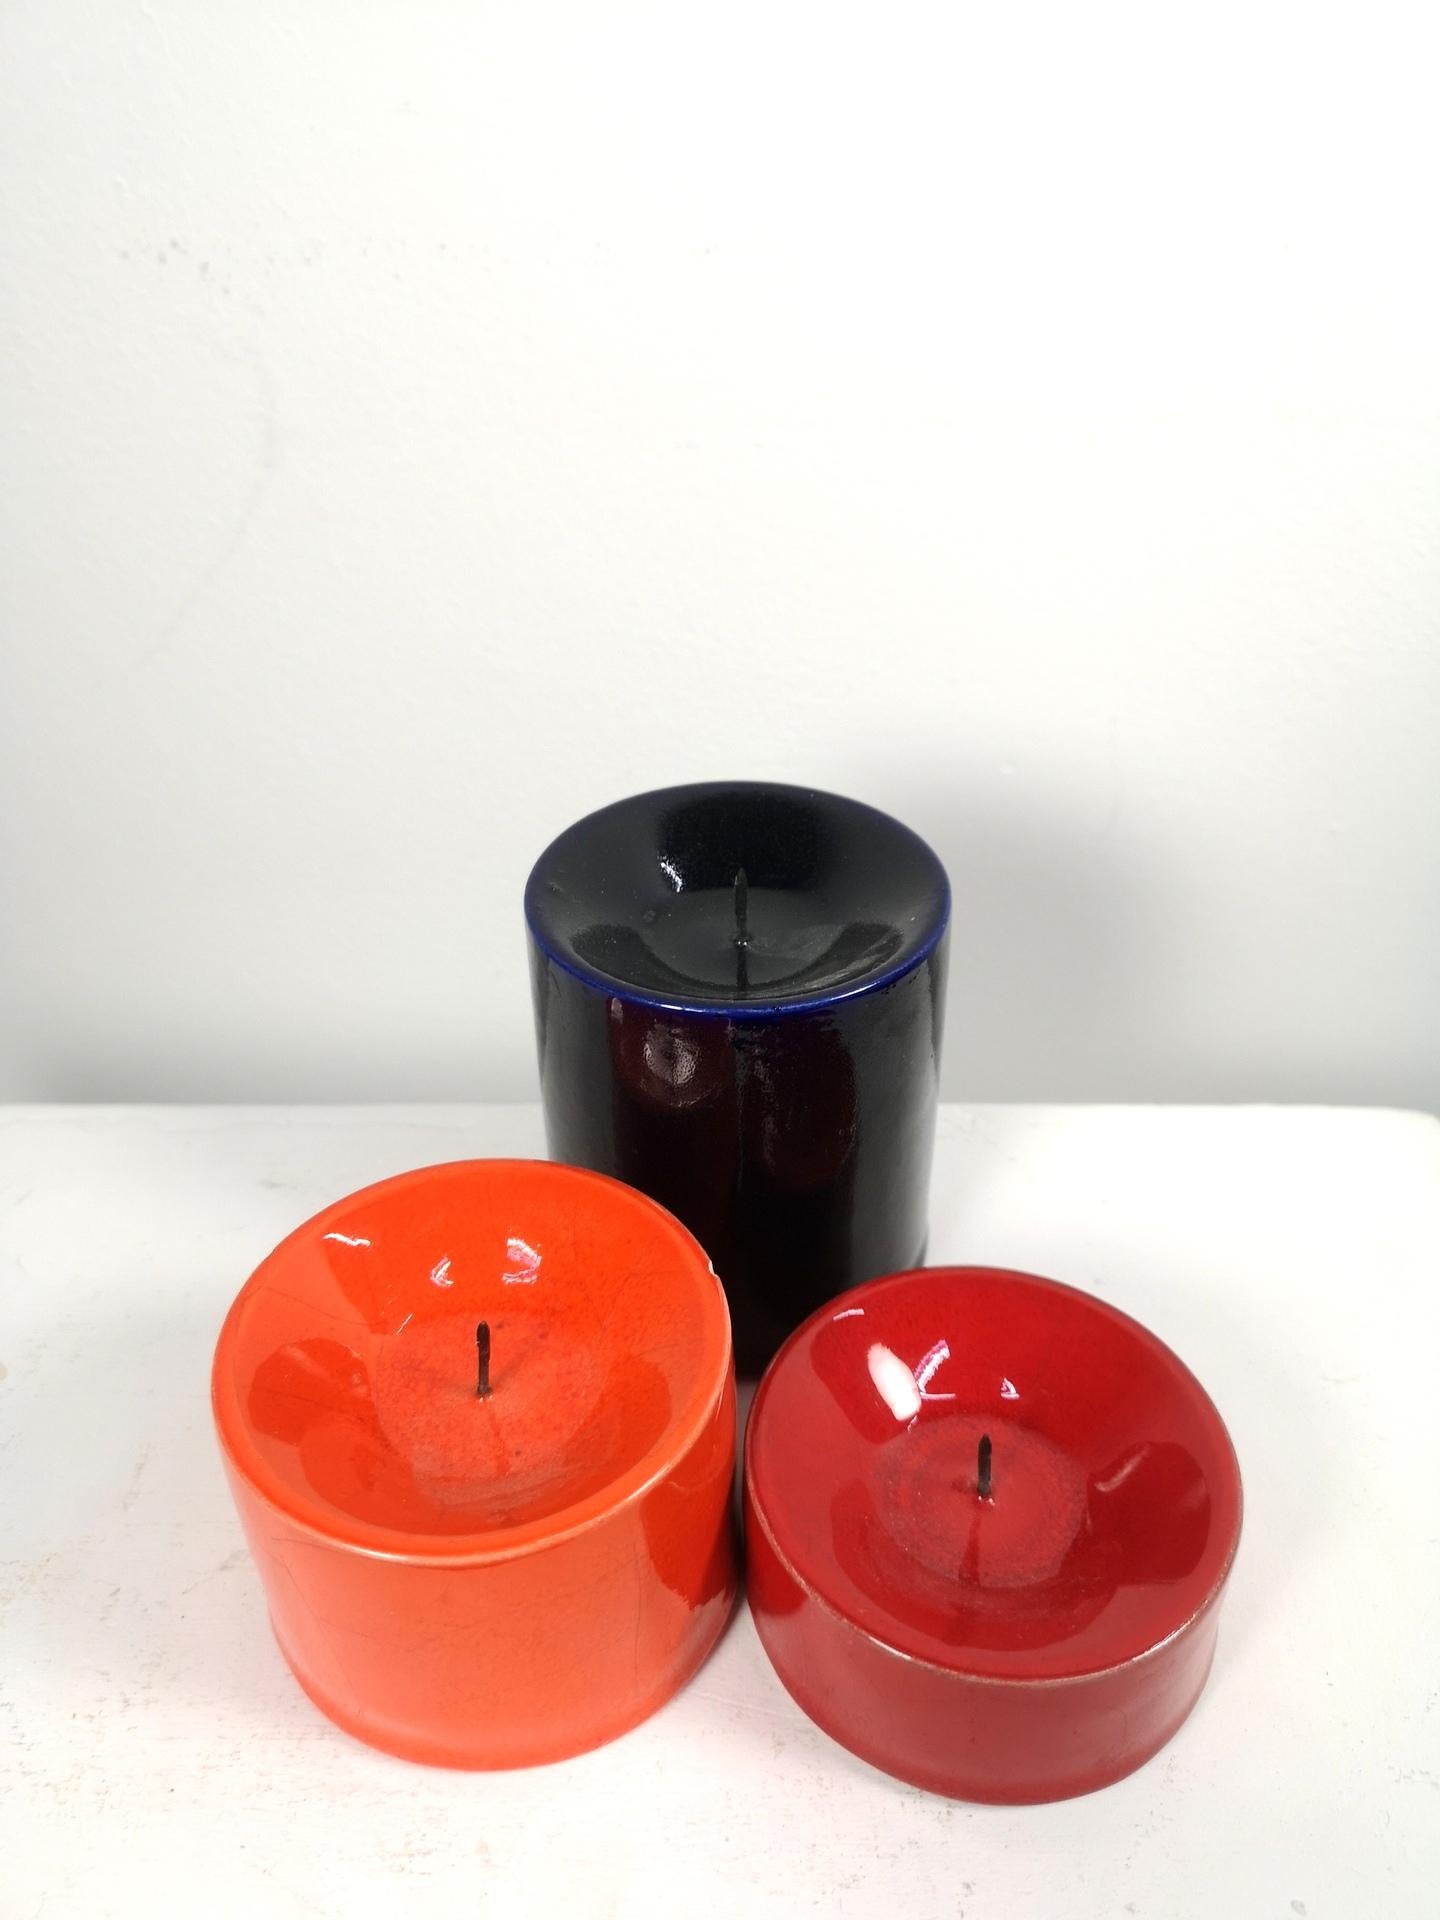 Set of Mid-Century Modern ceramic candleholders, from the 1970's artisan period. They're signed, and generally in good condition, although some minor chips, scratches may occur due to vintage age.